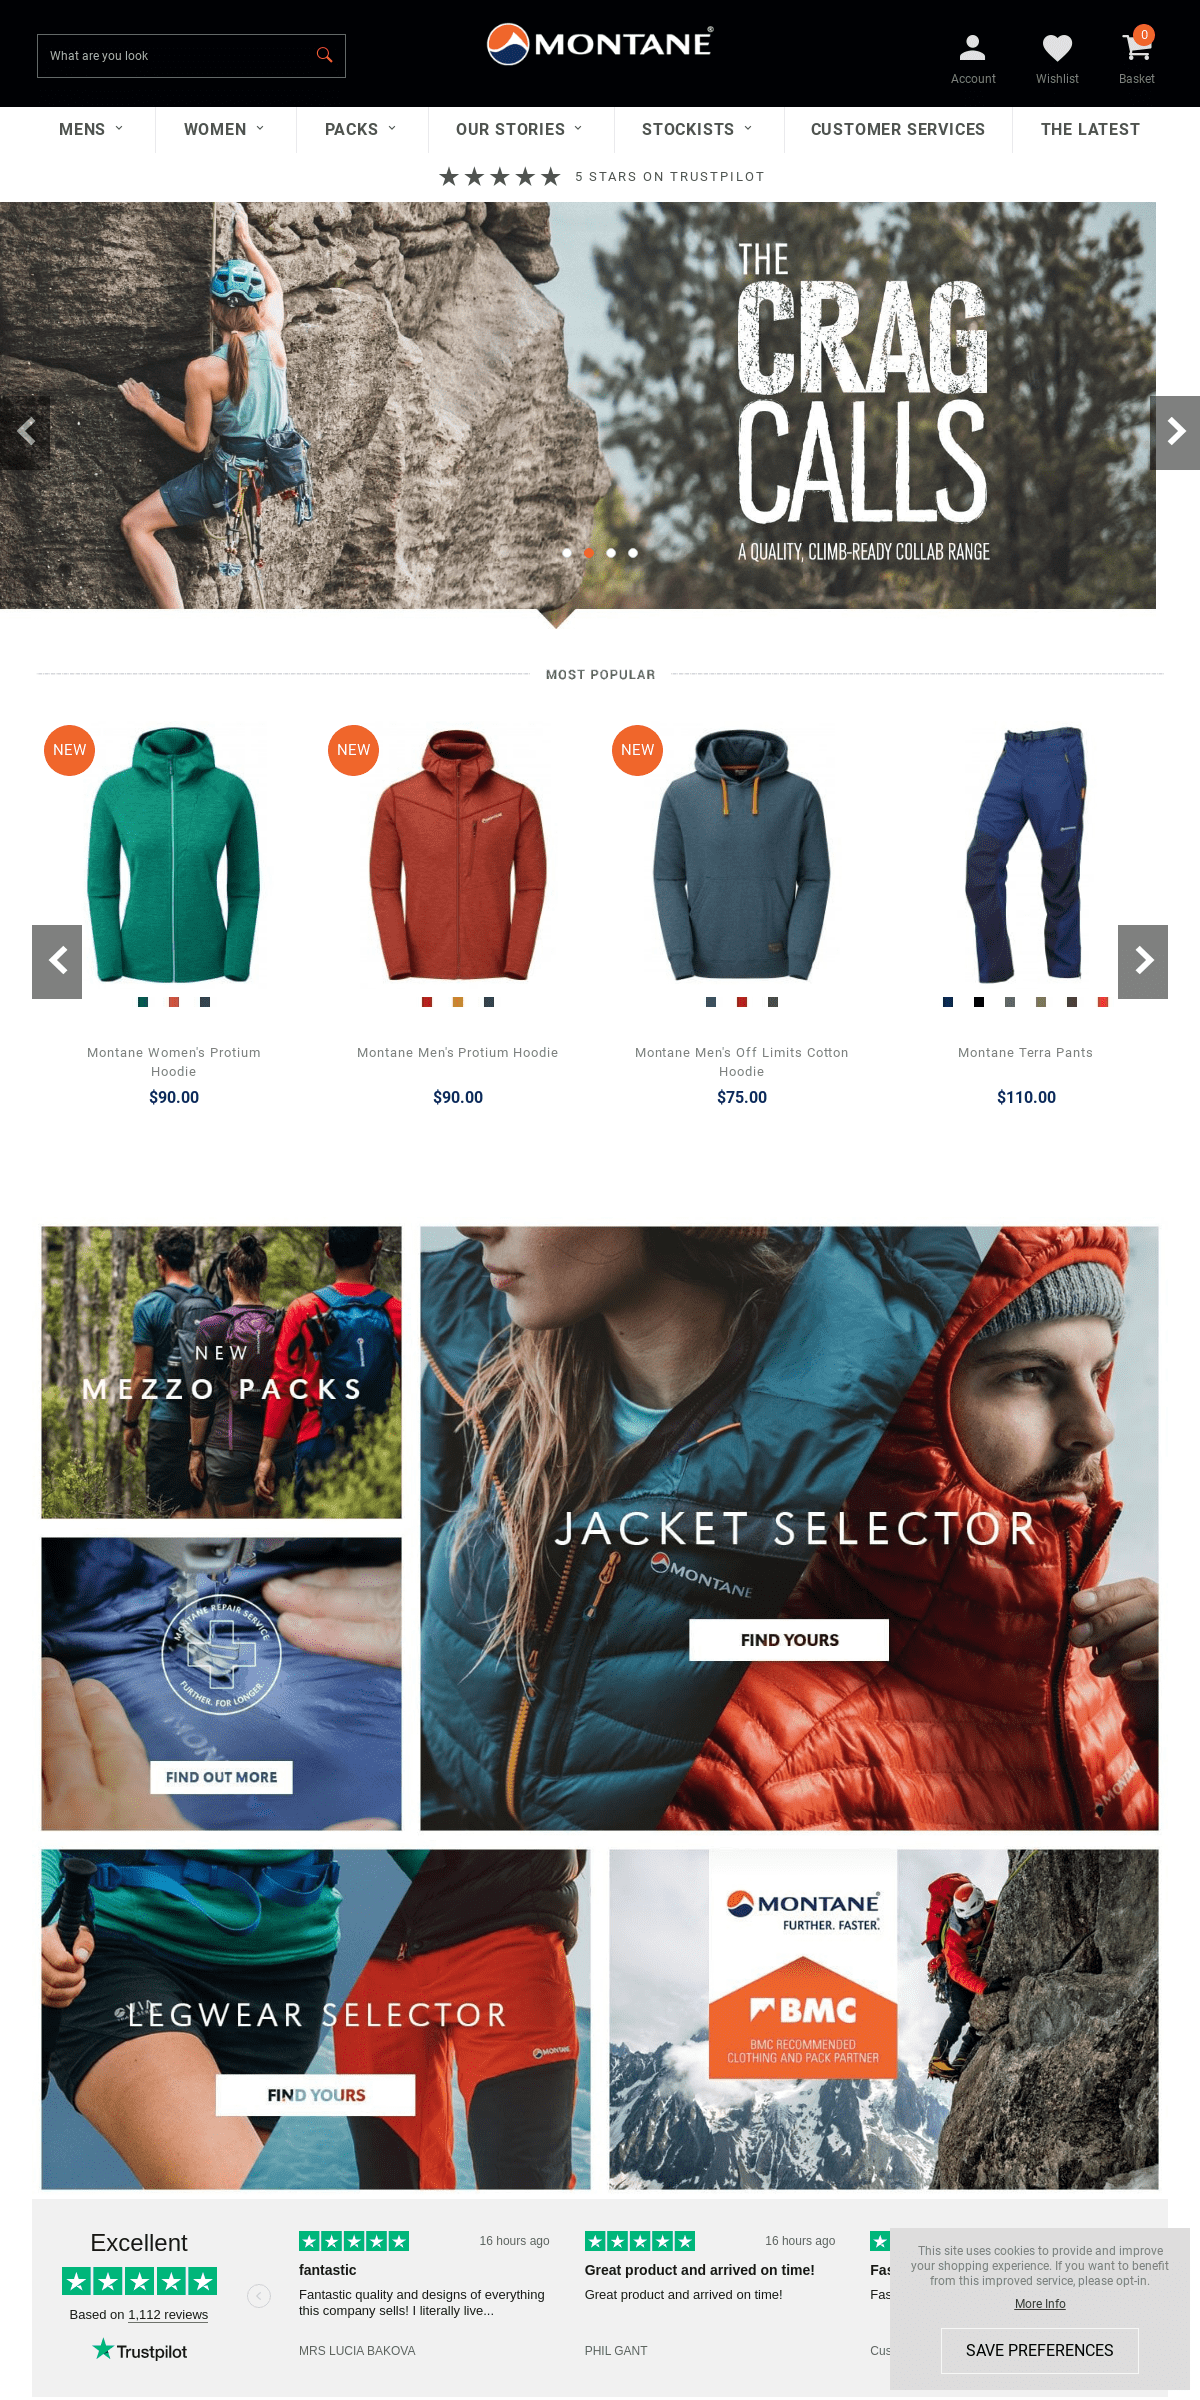 A complete backup of montane.co.uk